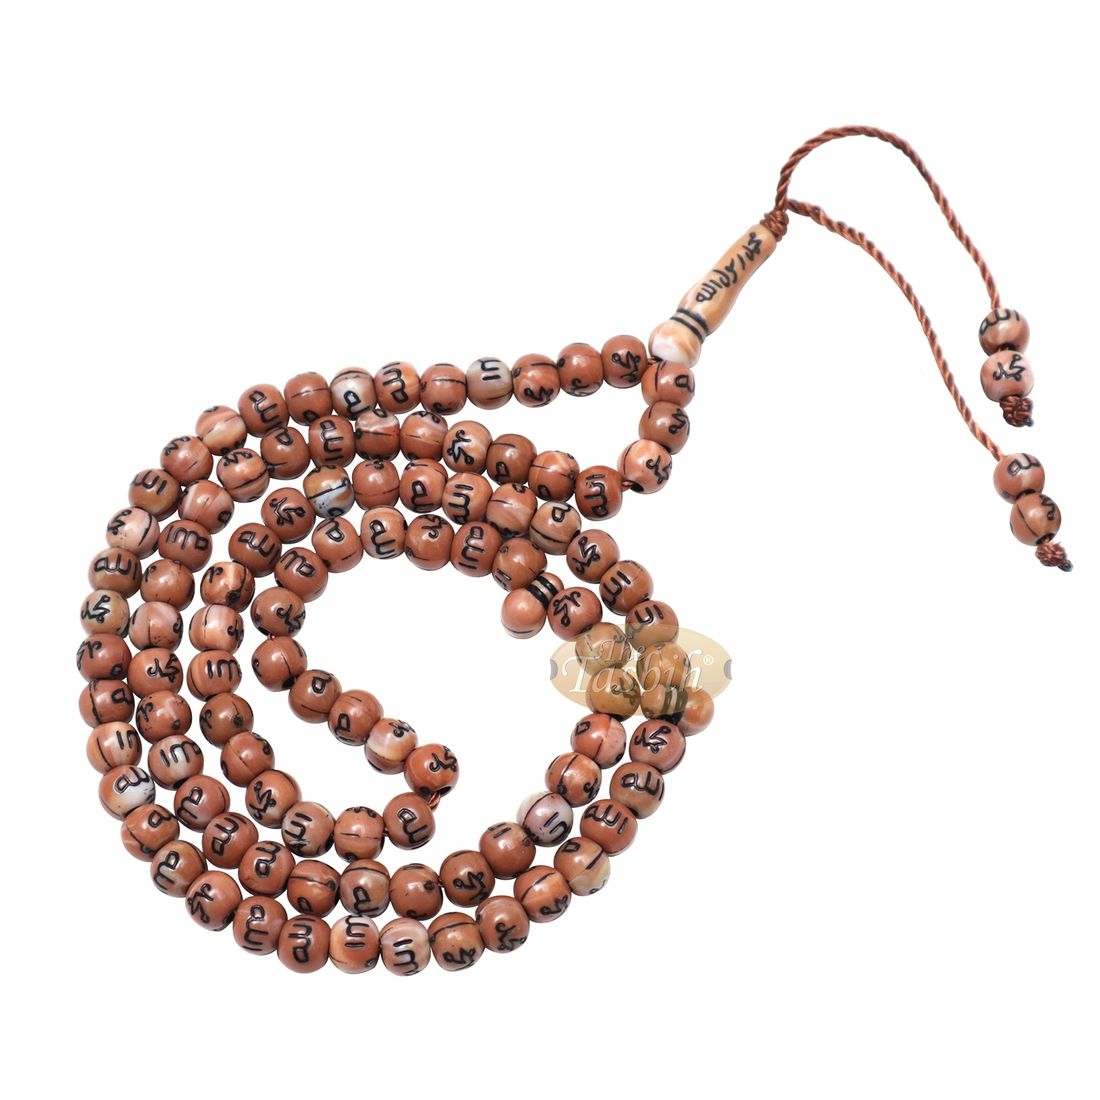 Stunning Marble Brown Plastic Tasbih with 99 Allah Muhammad Engraved Beads